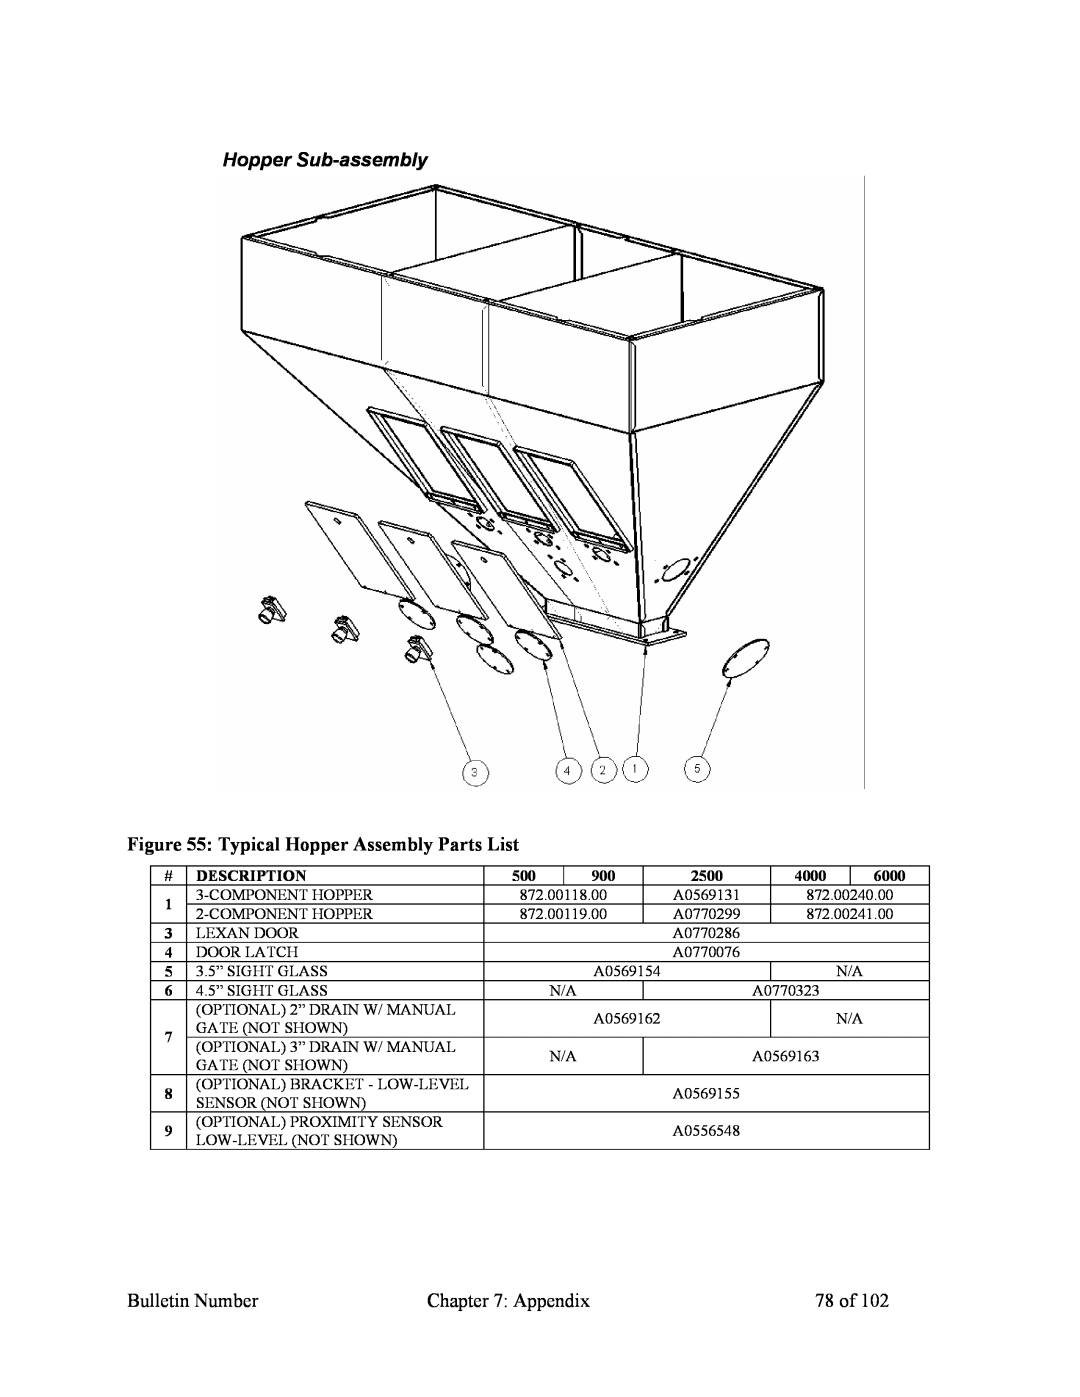 Mitsubishi Electronics 882.00207.00 specifications Hopper Sub-assembly, Typical Hopper Assembly Parts List 